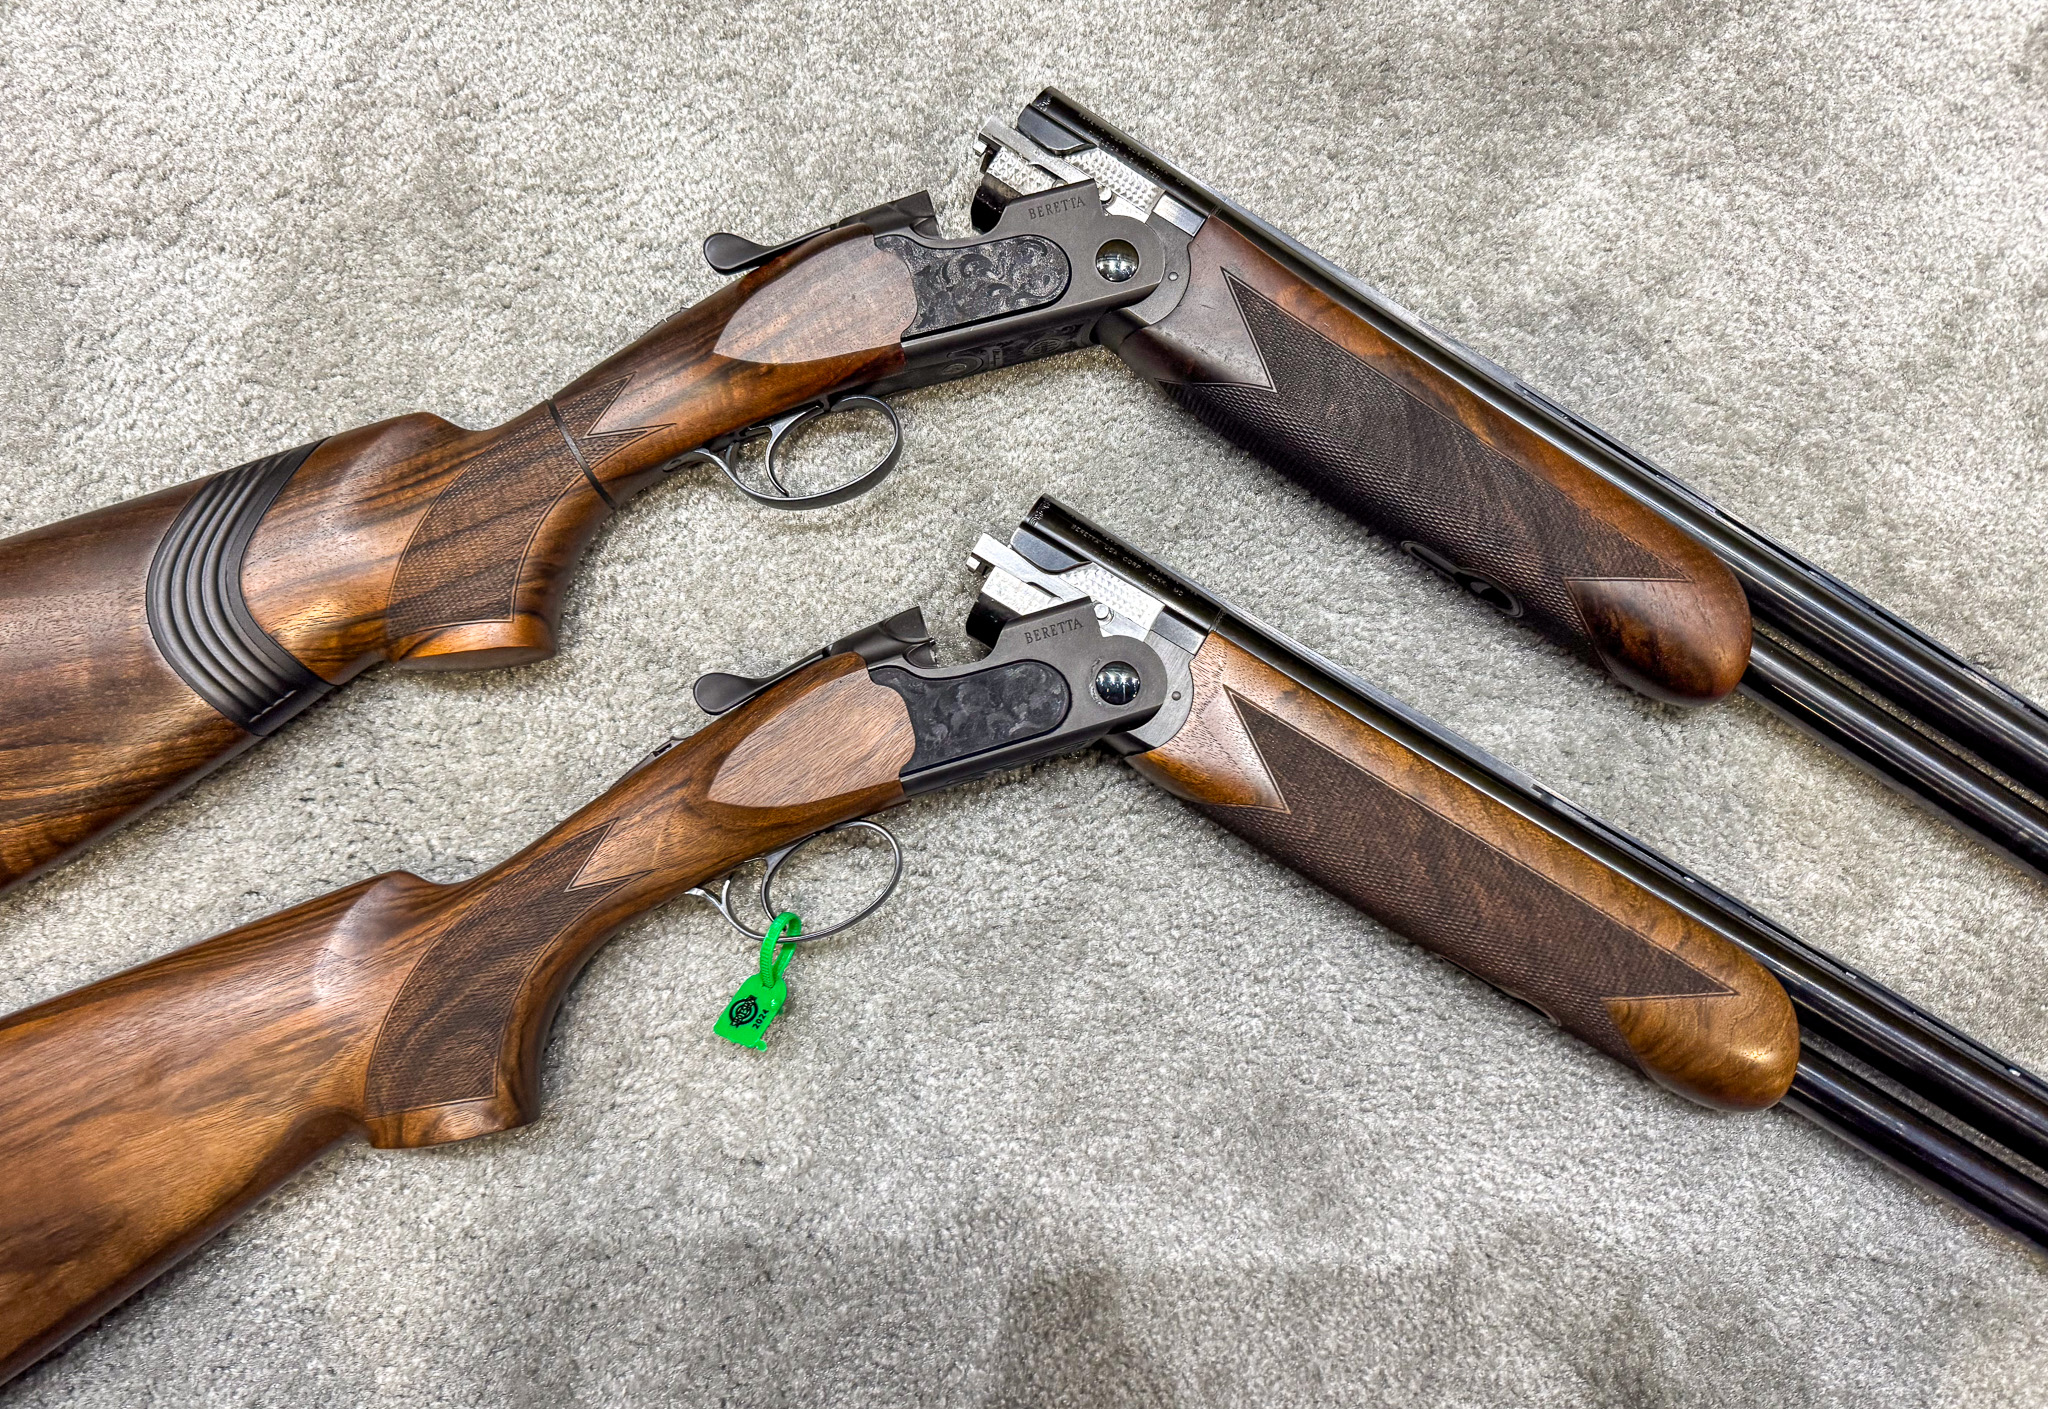 Two break-action shotguns with black receivers and dark wood, lying on a carpet.